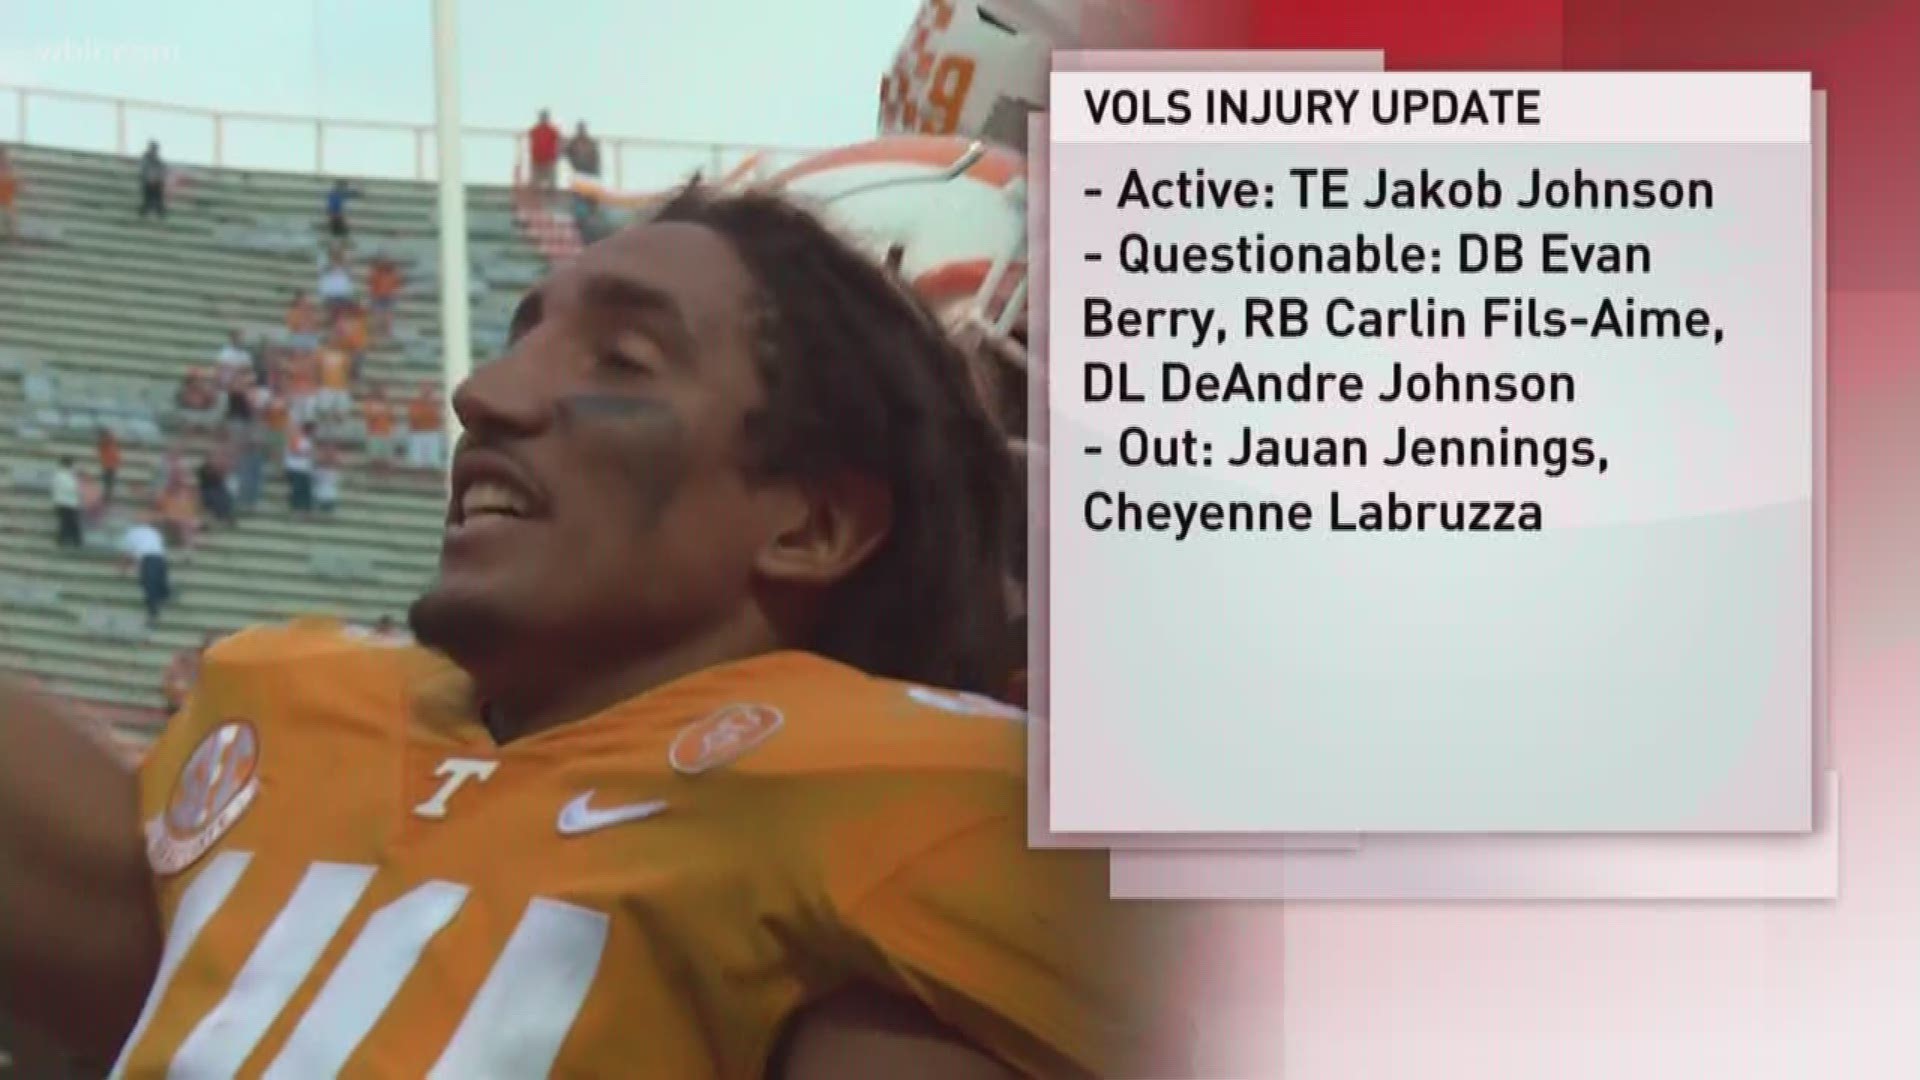 Evan Berry is questionable, and Jakob Johnson will return for the Alabama game.